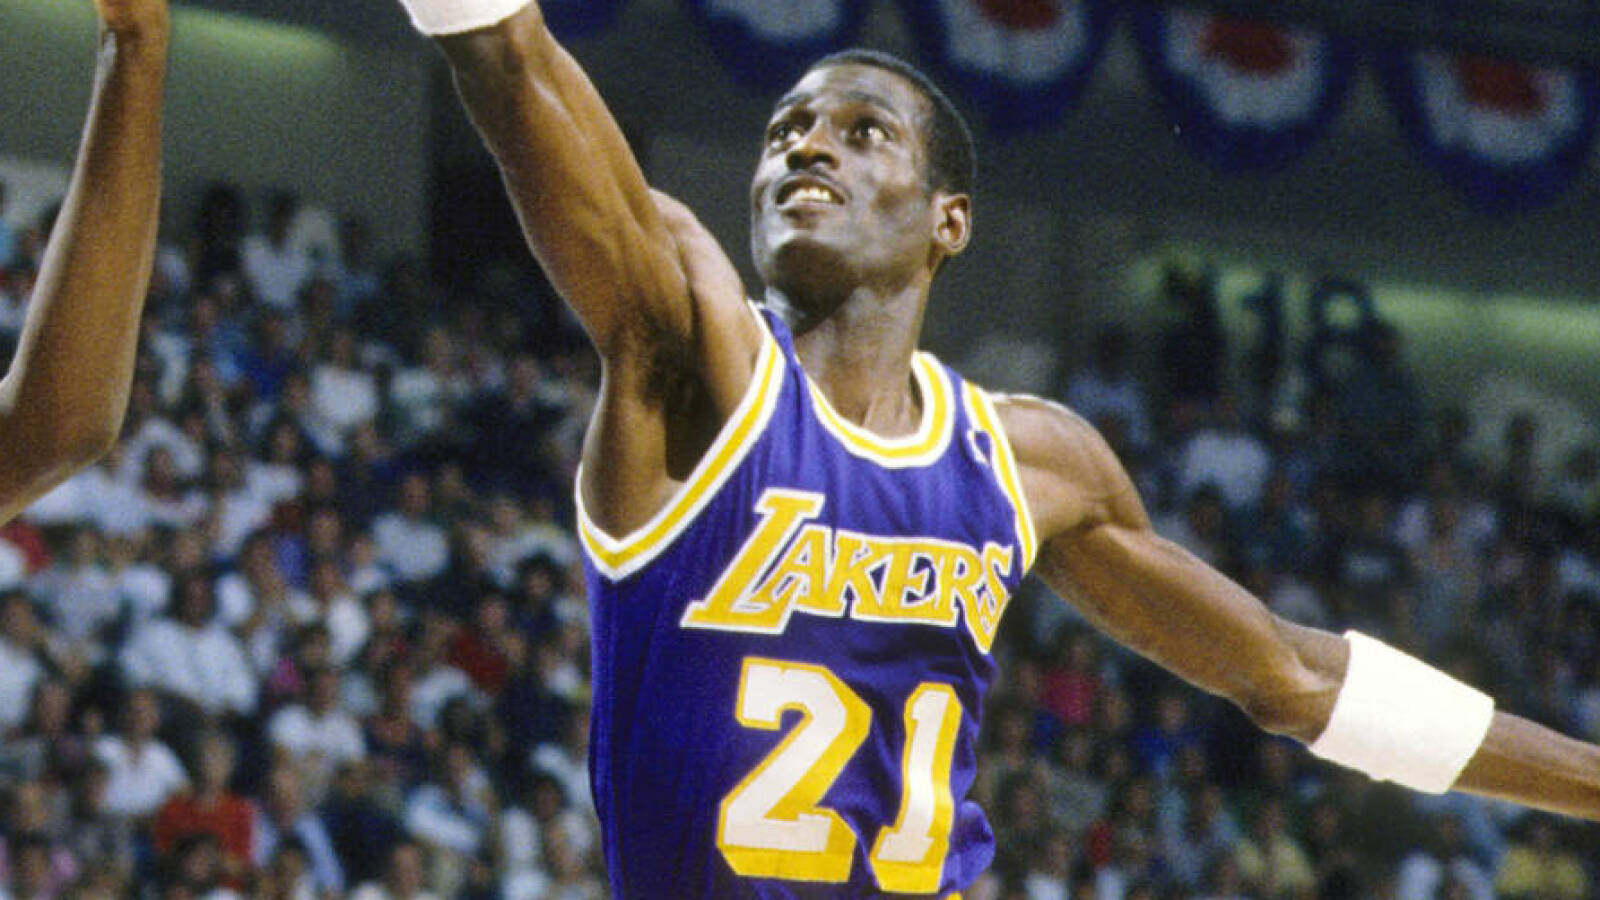 Michael Cooper's Hall of Fame induction could open Pandora's box